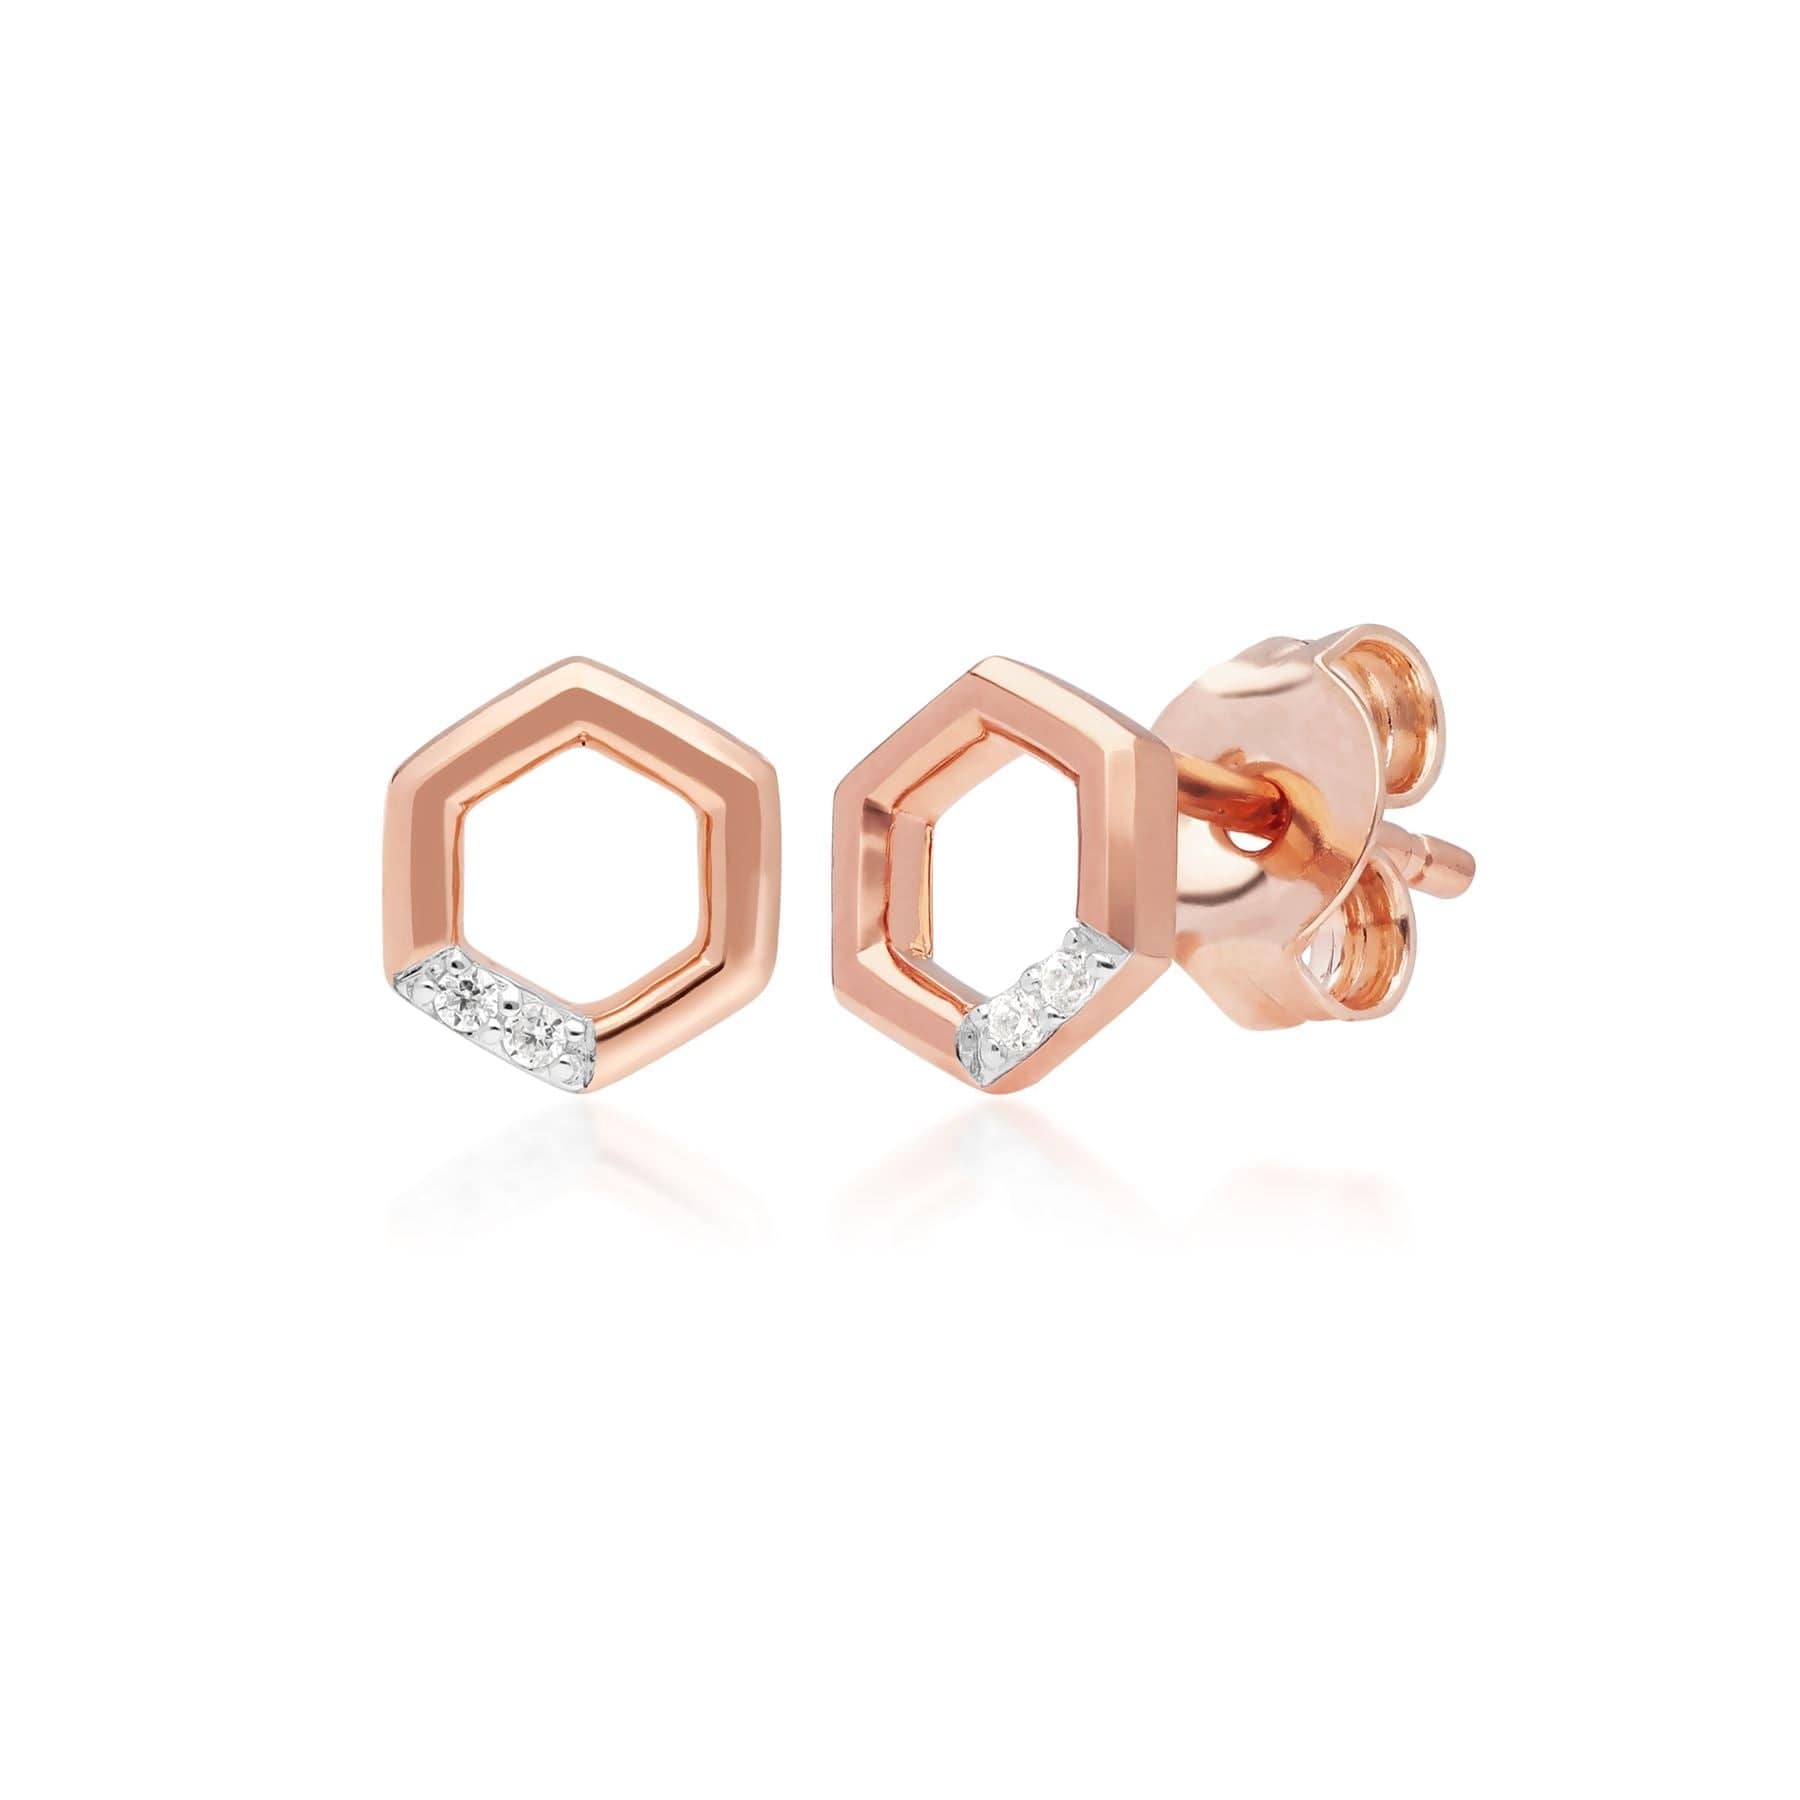 191E0400019 Diamond Pave Hexagon Stud Earrings in 9ct Rose Gold 1